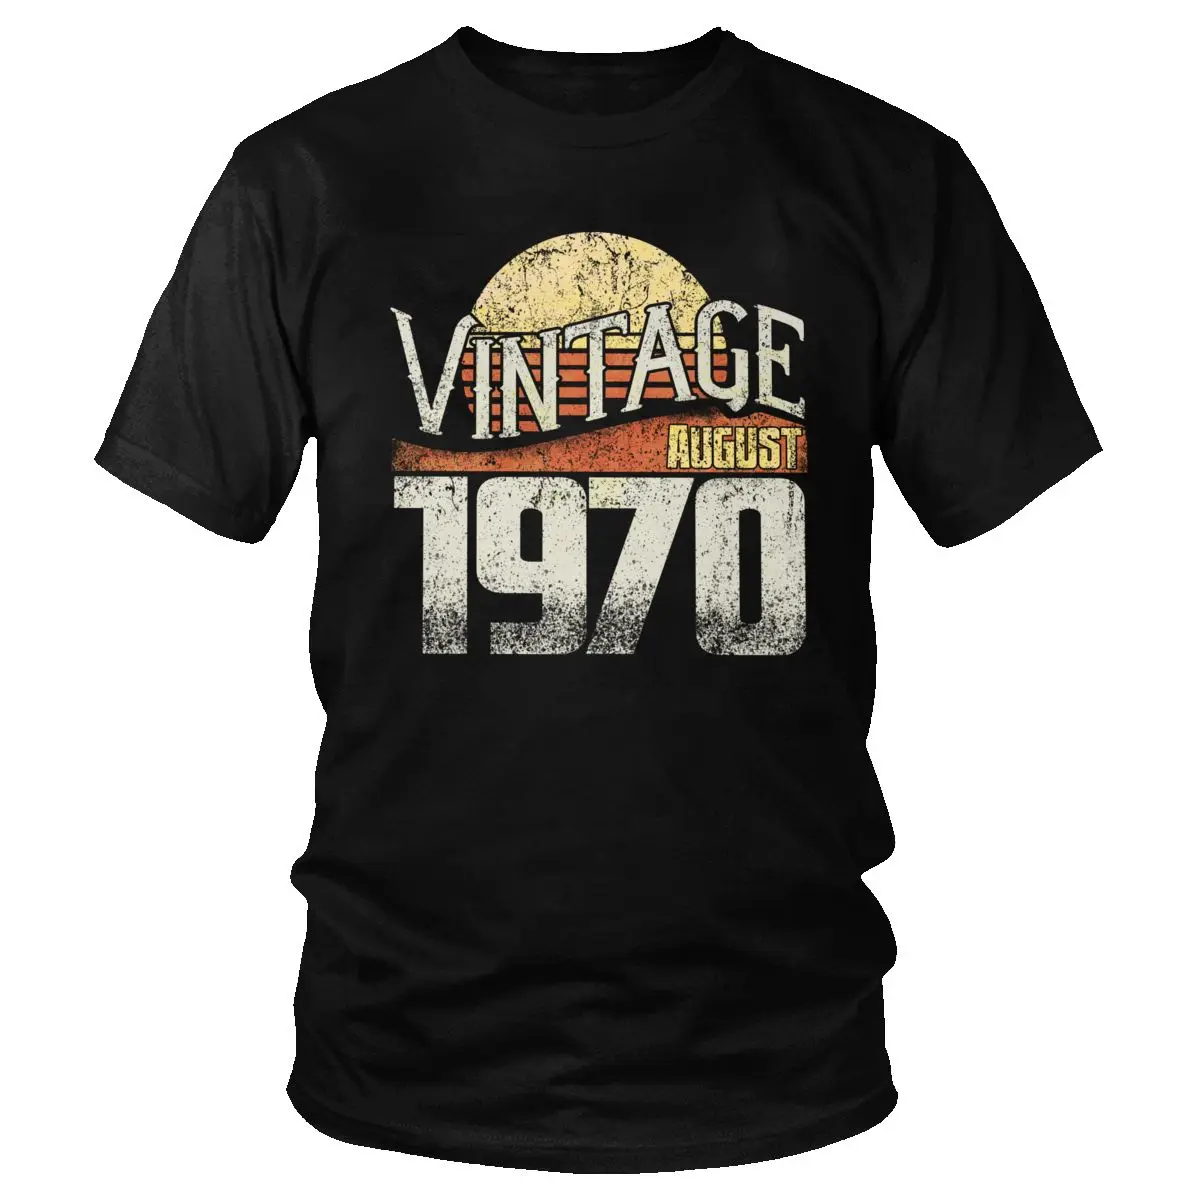 Cool Born In 1970 August T Shirt Men Short Sleeve 50 Year Old T-shirt 50th Birthday Printed Tshirt Pure Cotton Slim Fit Tee Top